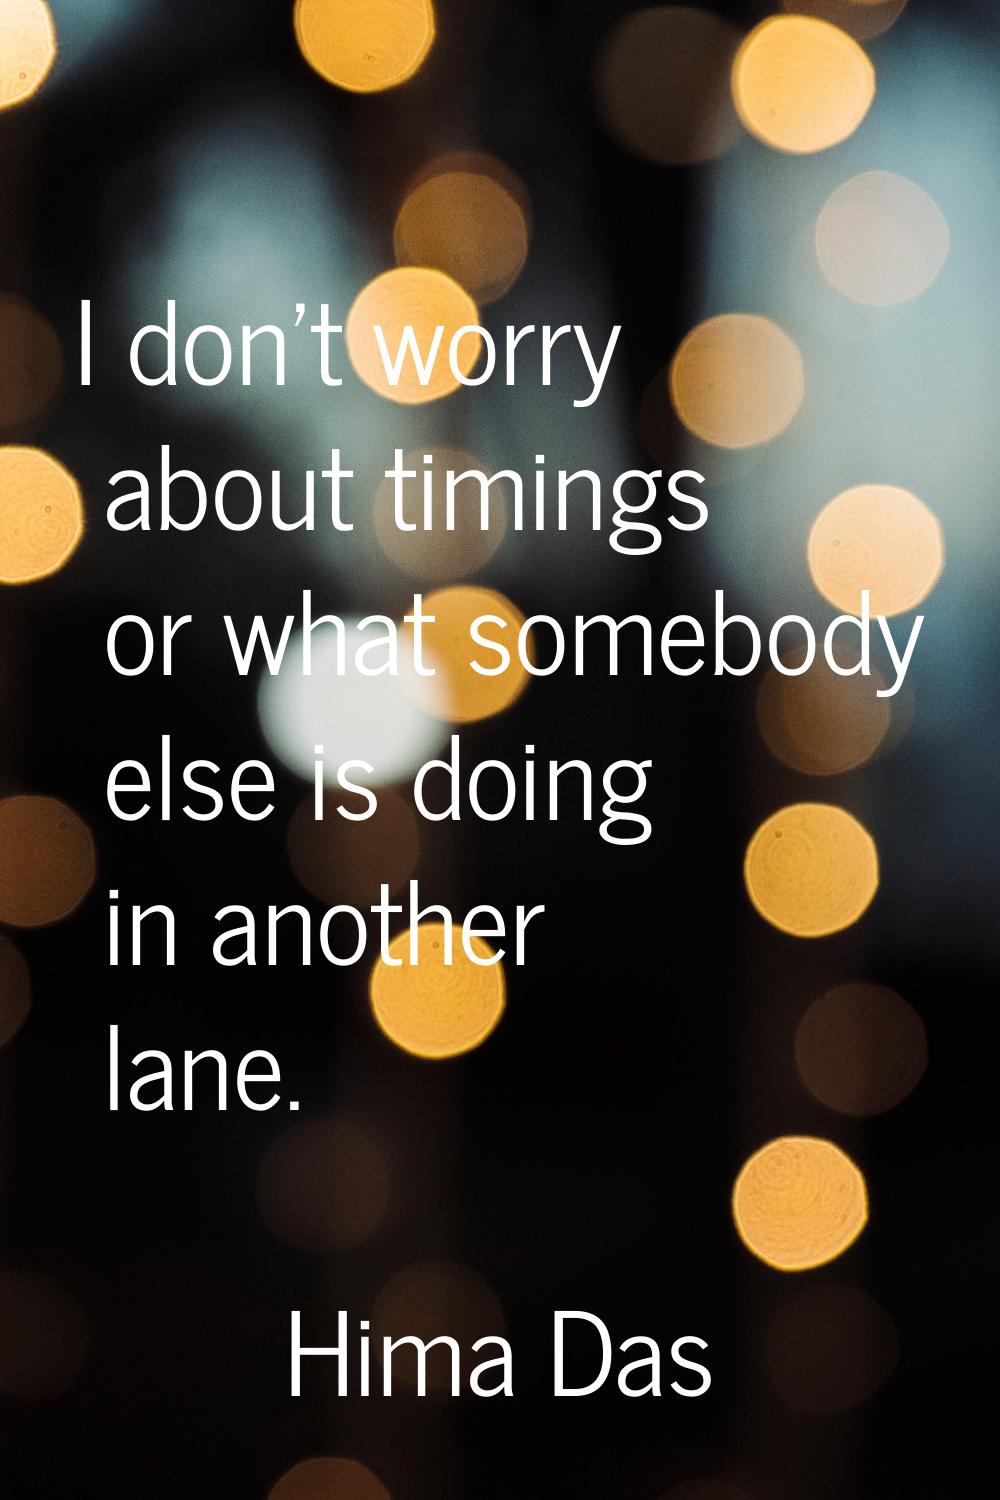 I don't worry about timings or what somebody else is doing in another lane.